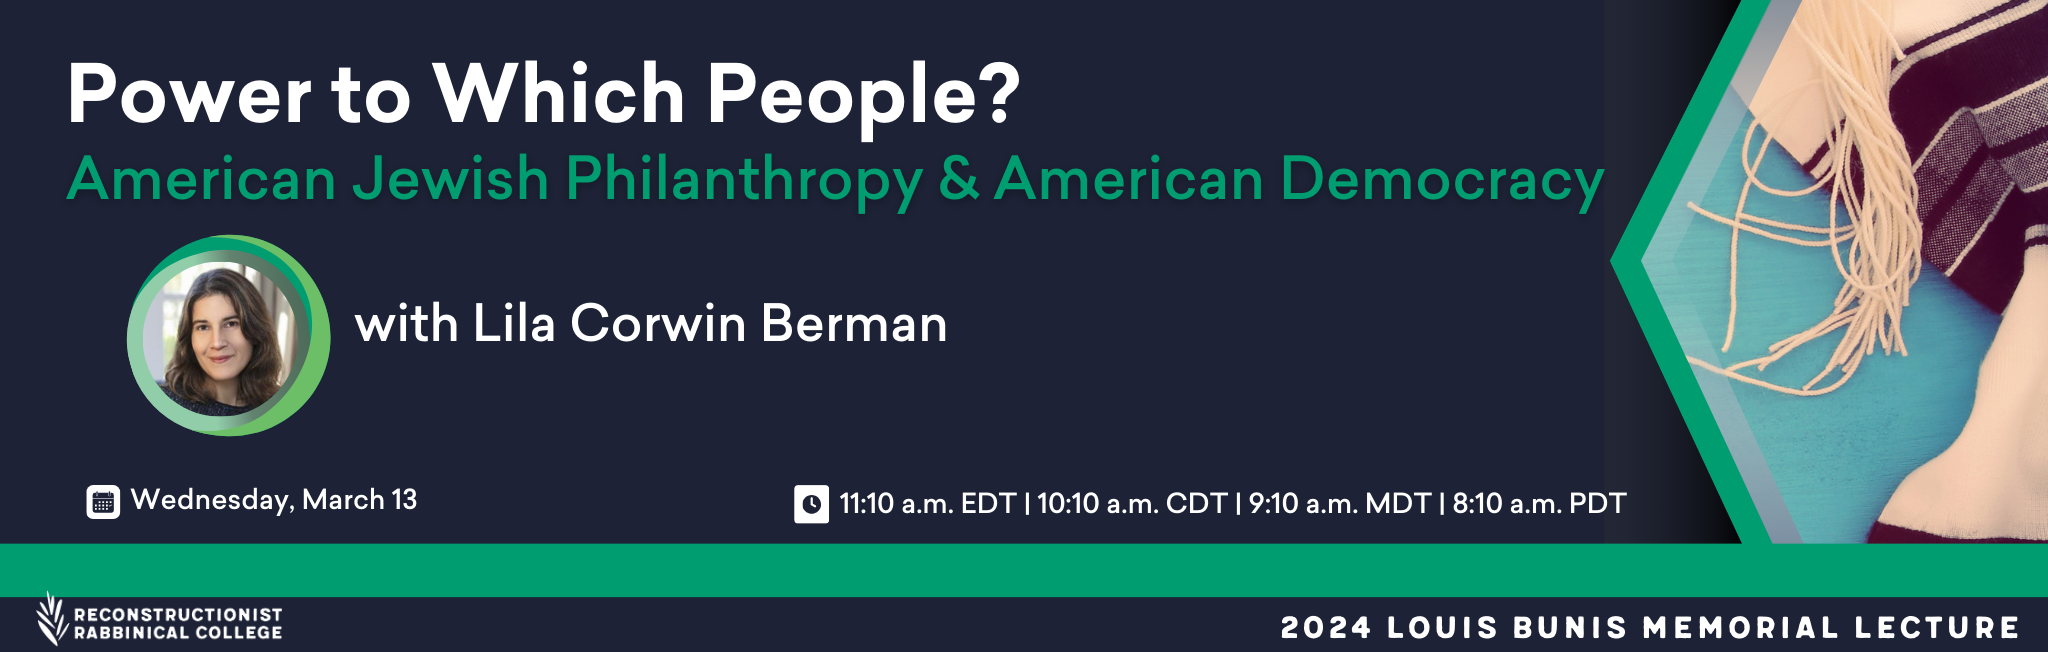 Power to Which People? American Jewish Philanthropy & American Democracy with Lila Corwin Berman on Wednesday, MArch 13 @ 11:10 a.m. EDT